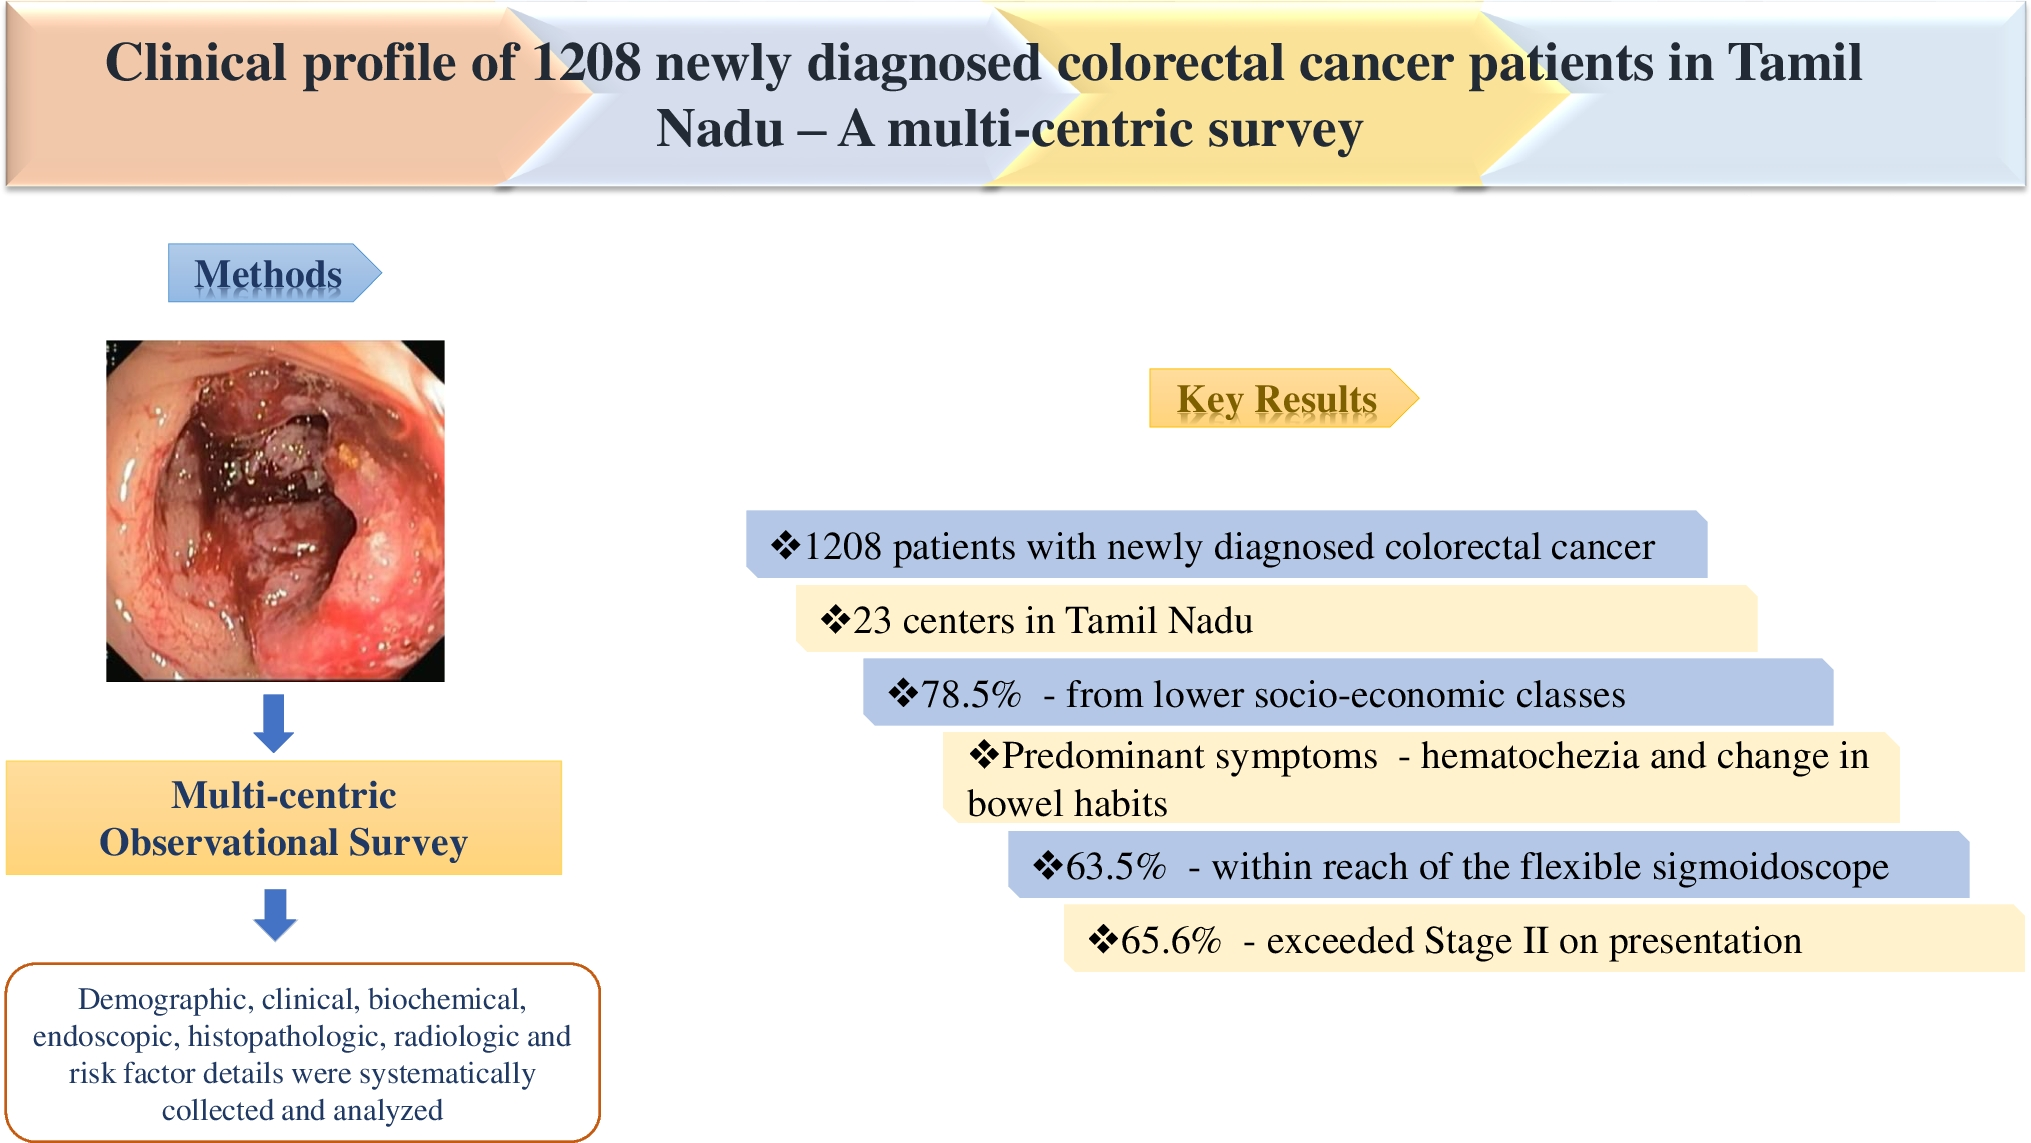 Clinical profile of 1208 newly diagnosed colorectal cancer patients in Tamil Nadu—A multi-centric survey